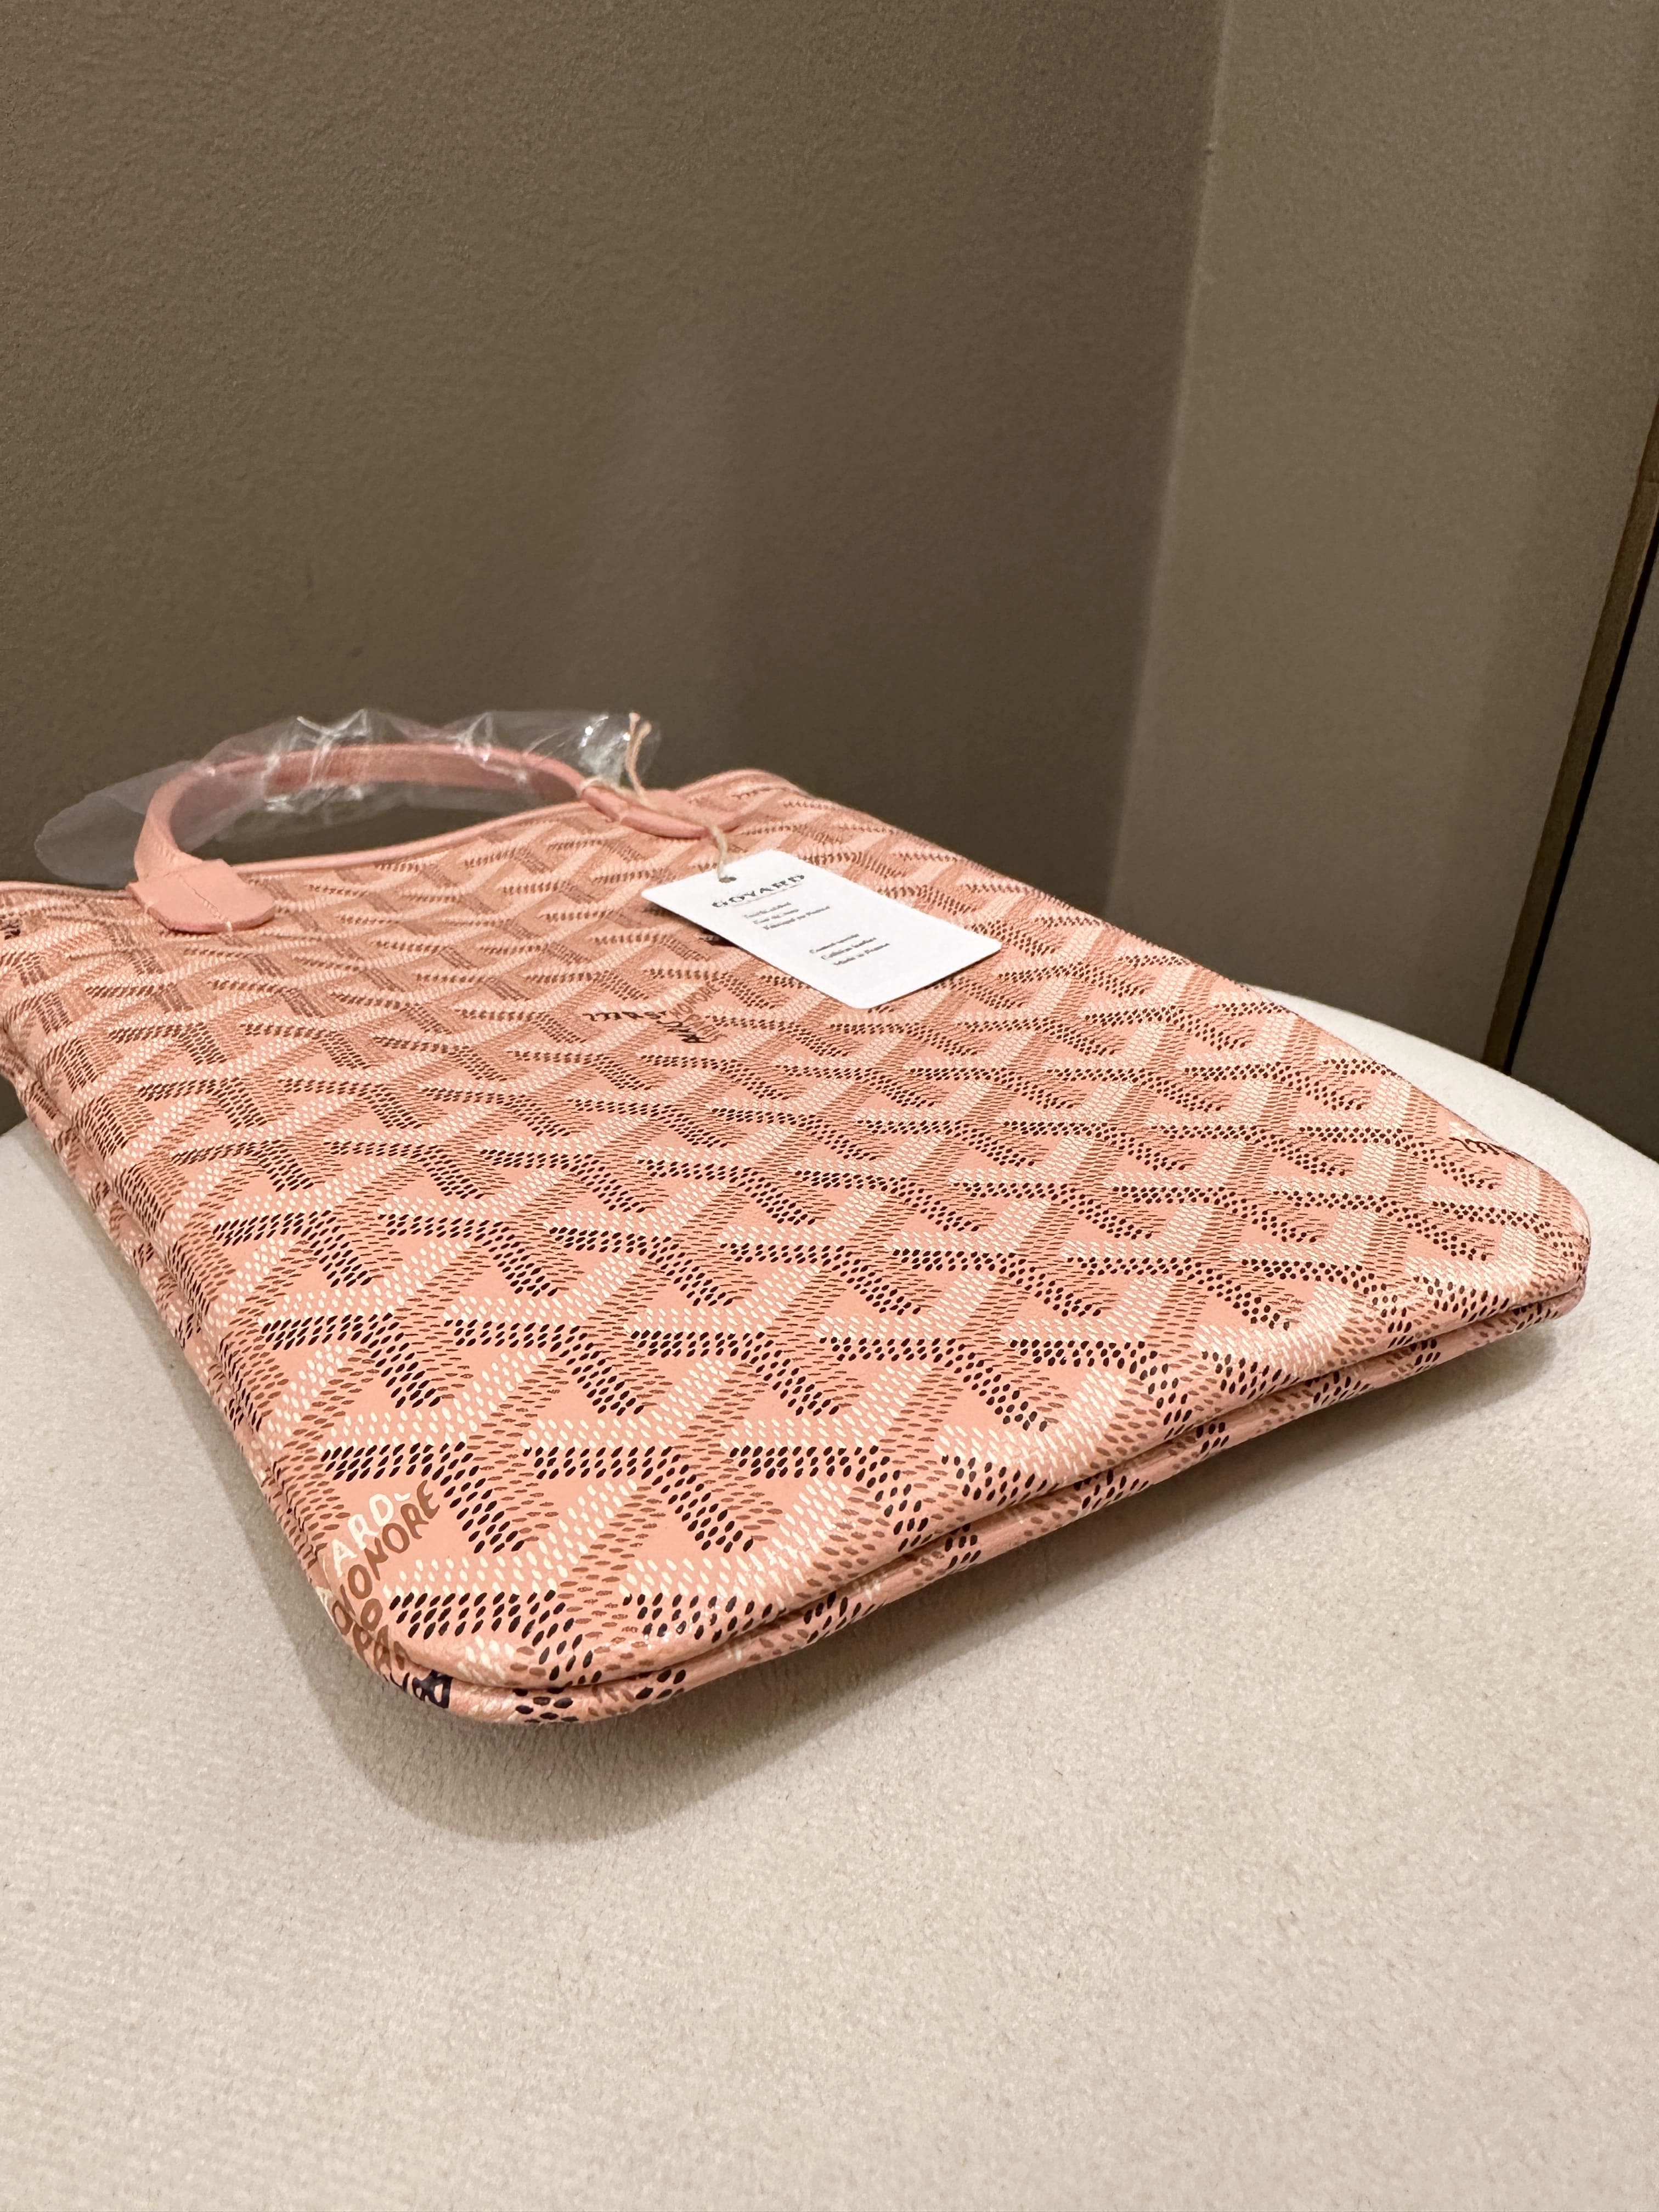 Goyard Limited Edition Pink Store, SAVE 57% 